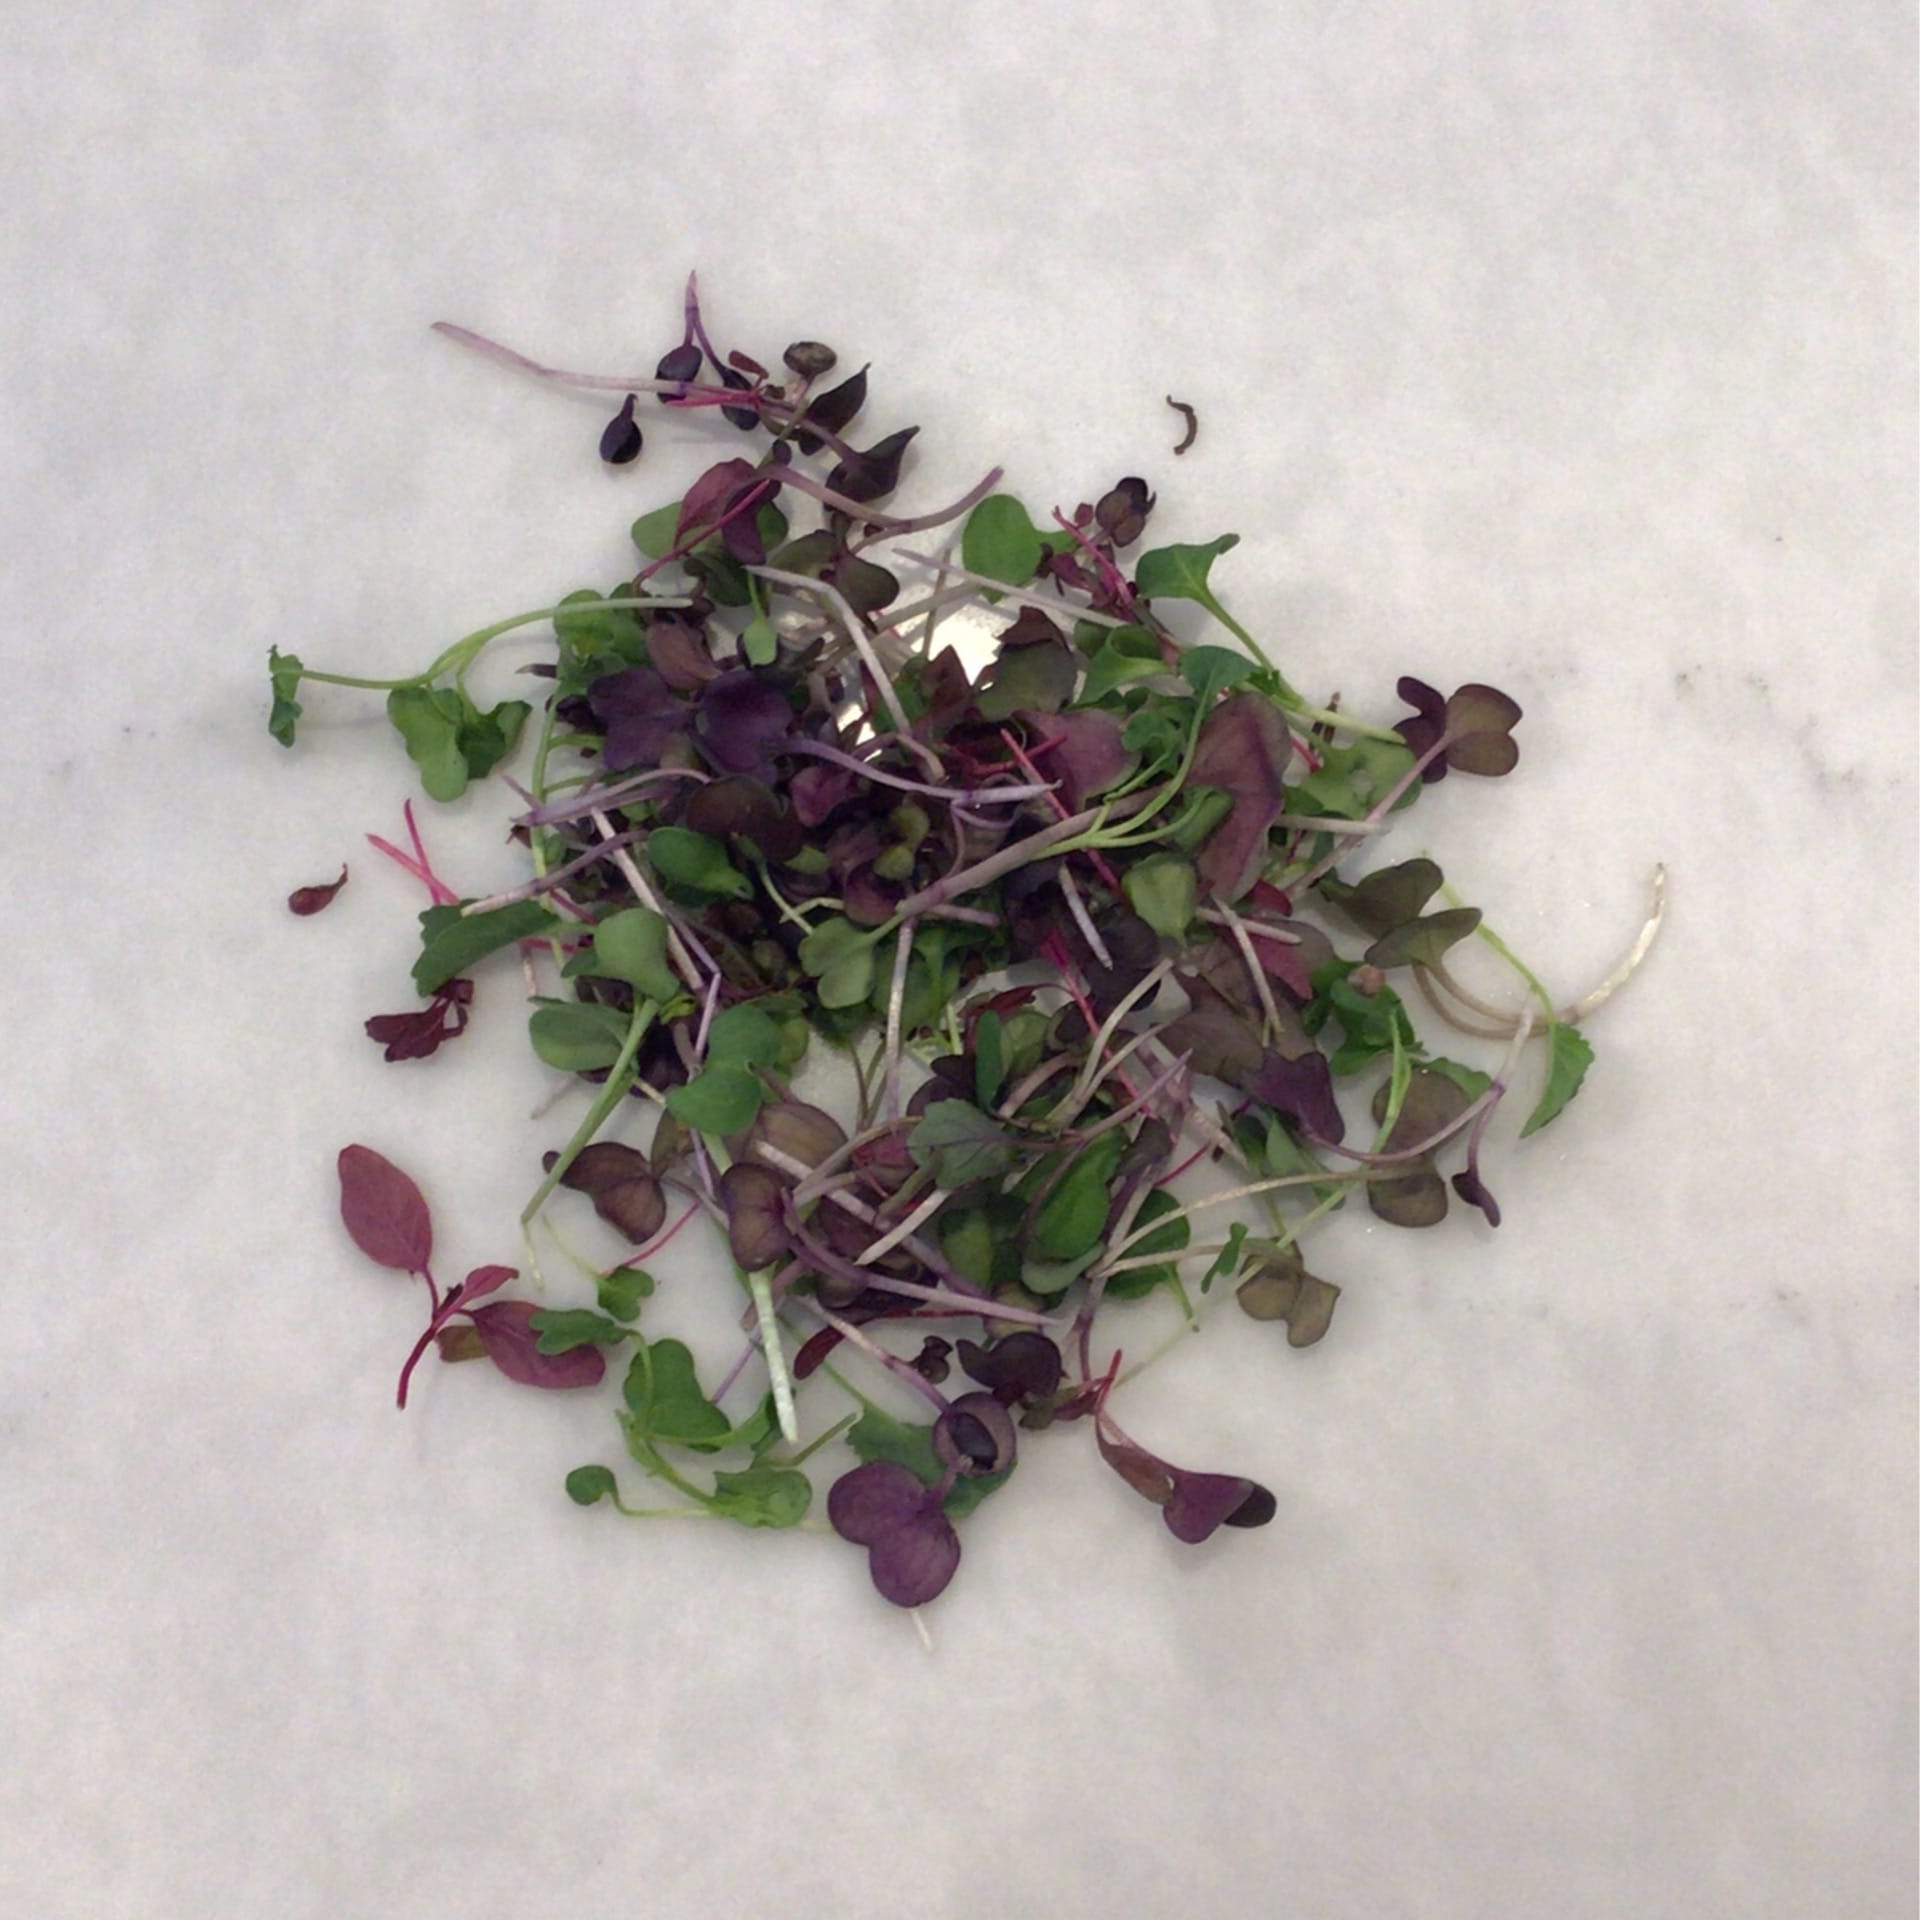 sold out country blend micro greens